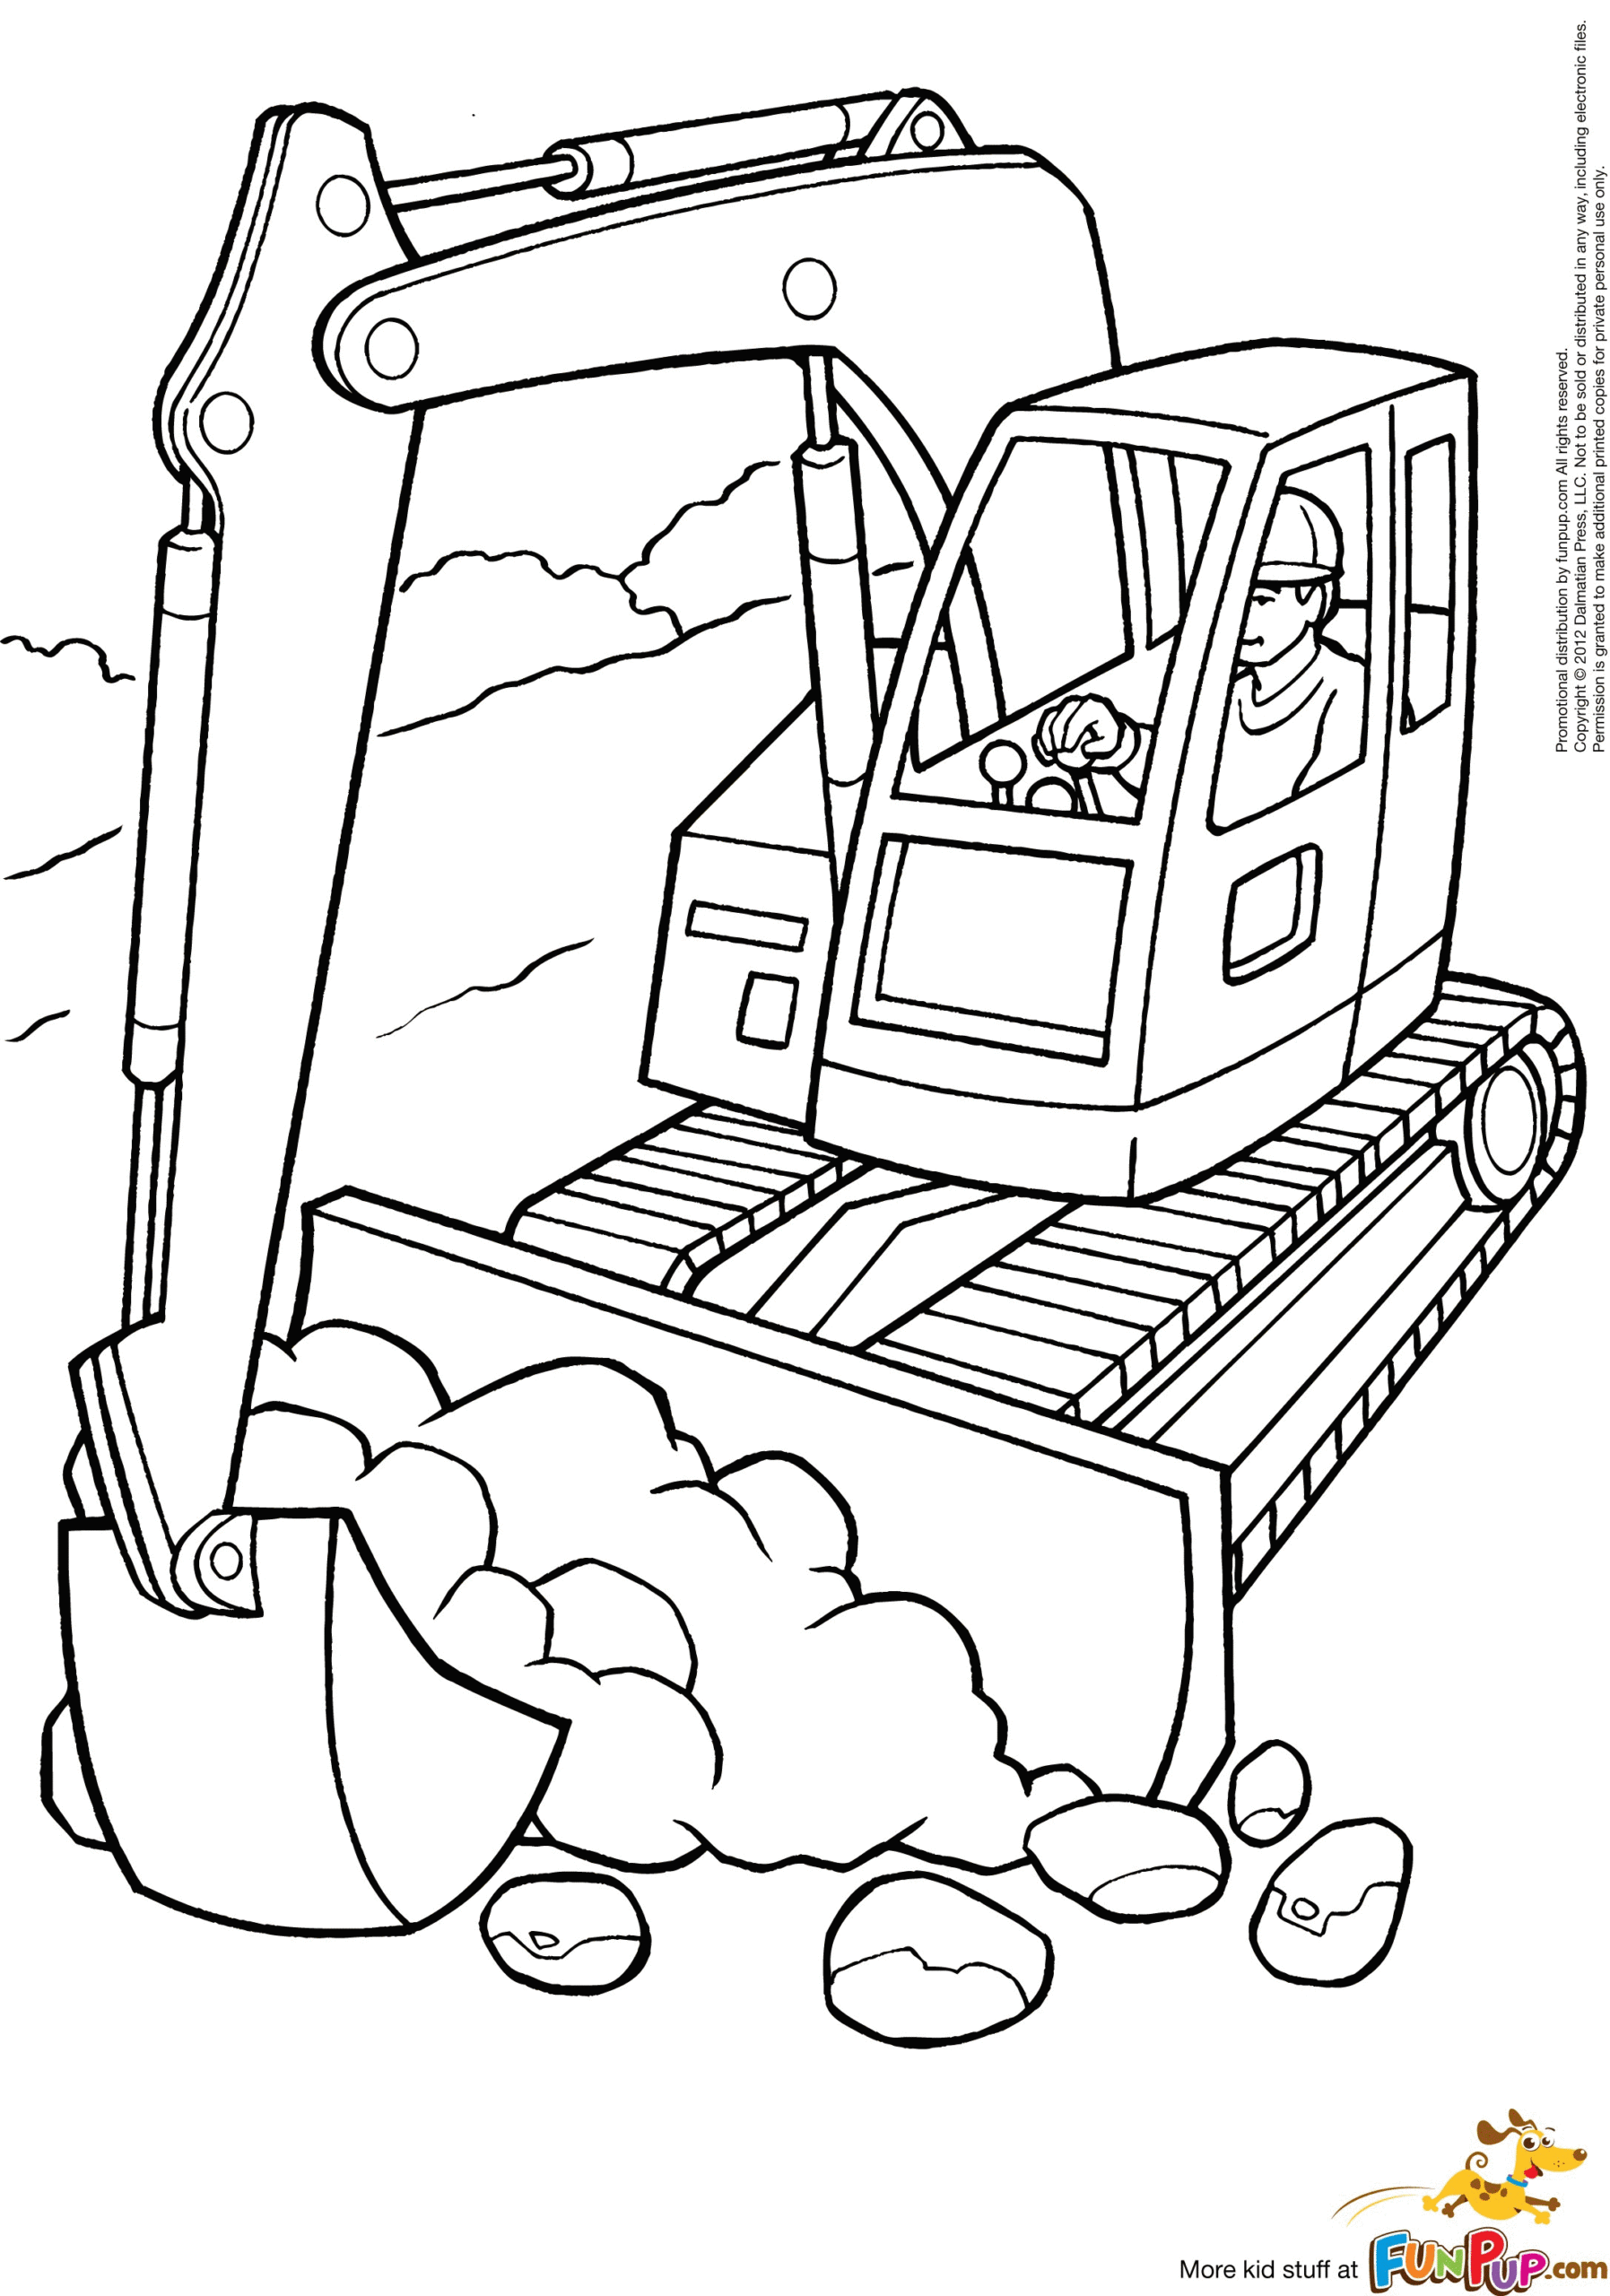 Coloring: Amazing Construction Coloring Pages Photo Inspirations. Hard Hat Coloring  Pages. Construction Hat Coloring Pages Printable Free. Free Construction  Coloring Pages To Print. Printable Construction Coloring Pages For Kids. Construction  Coloring 